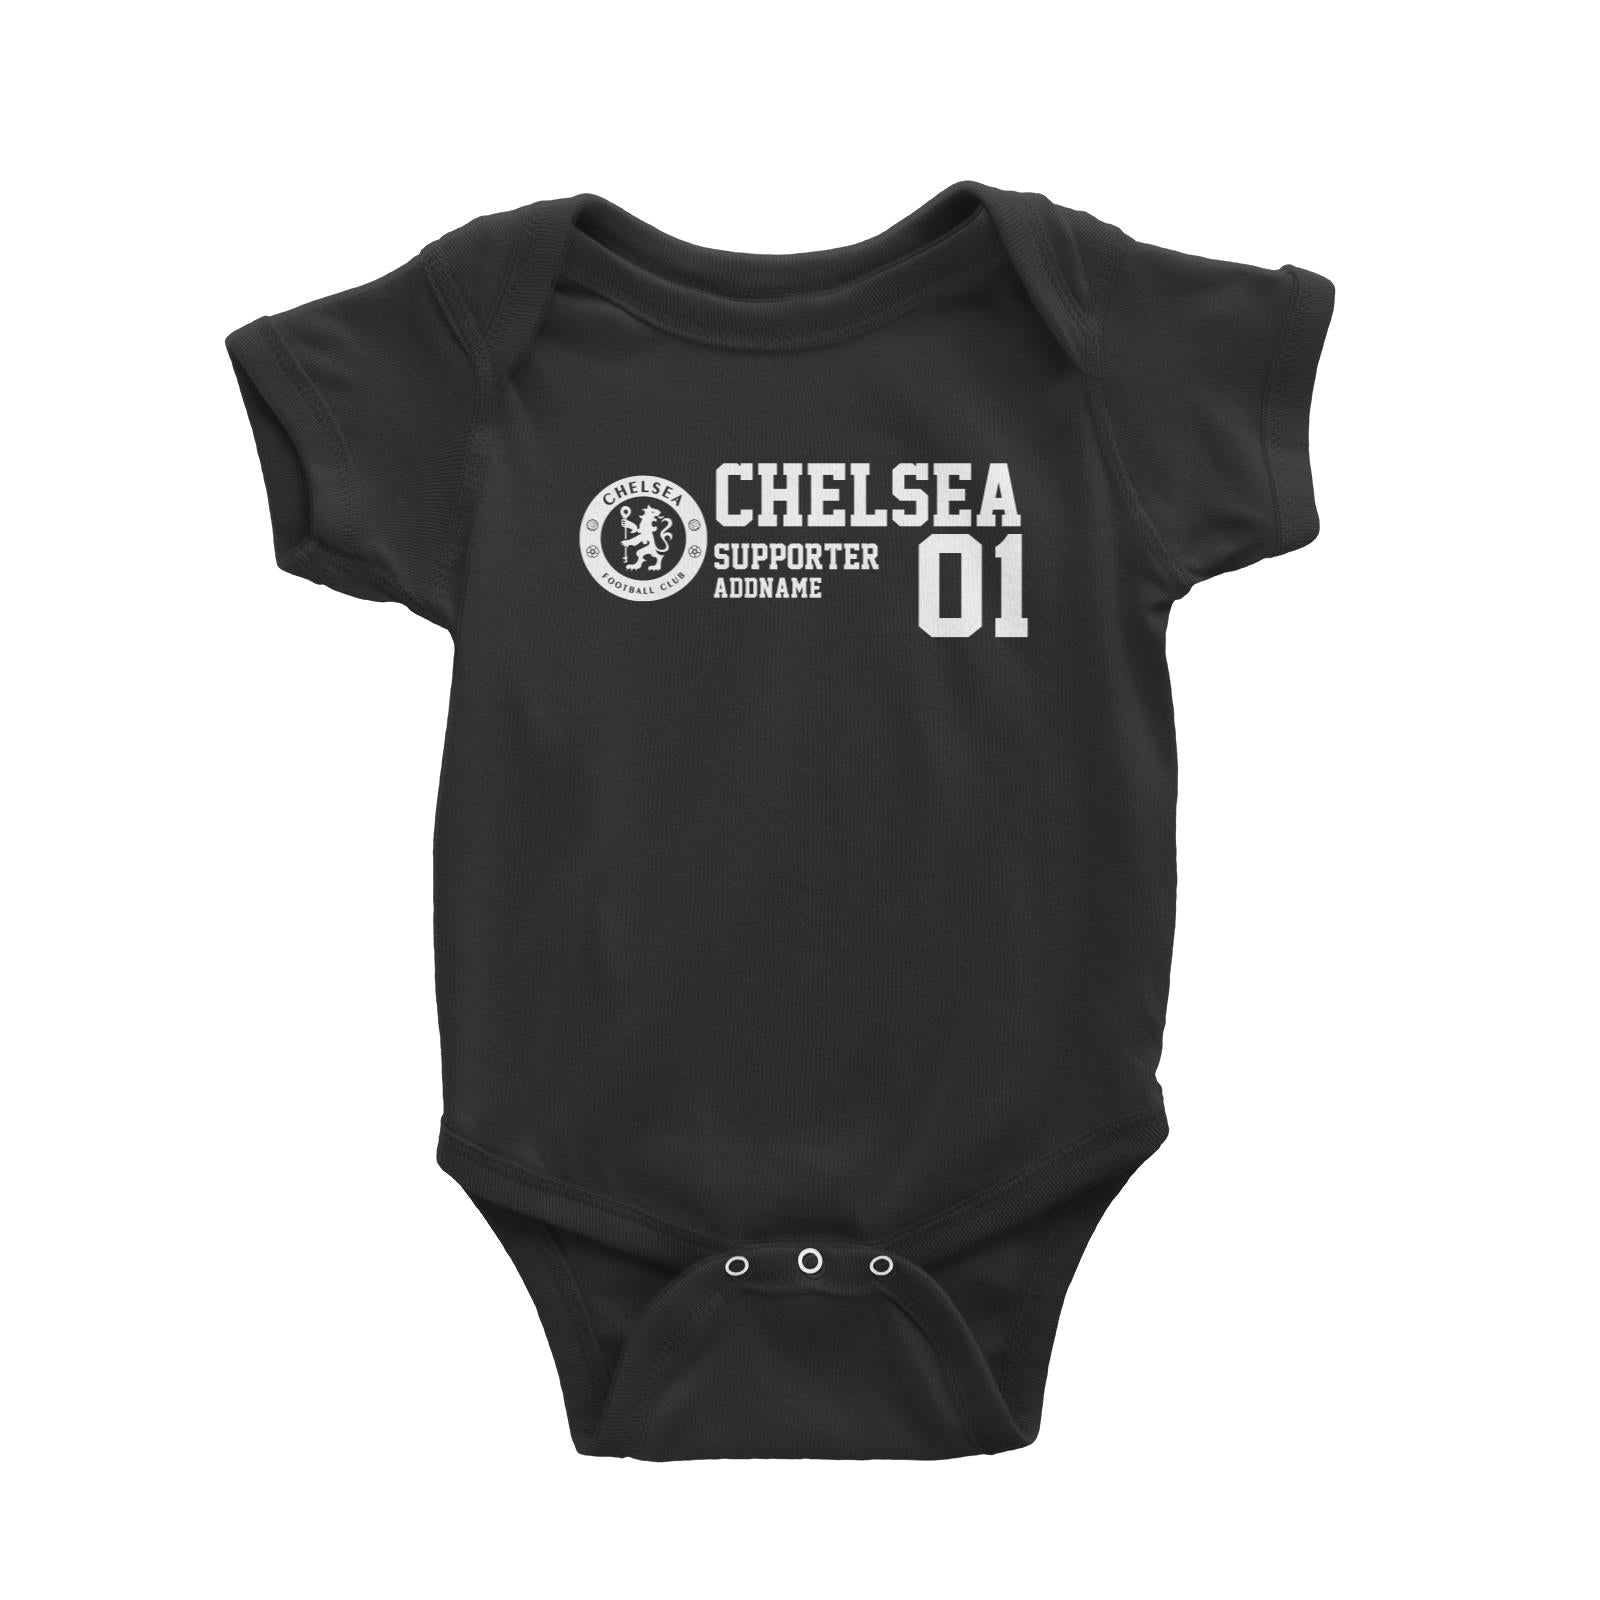 Chelsea Football Supporter Addname Baby Romper